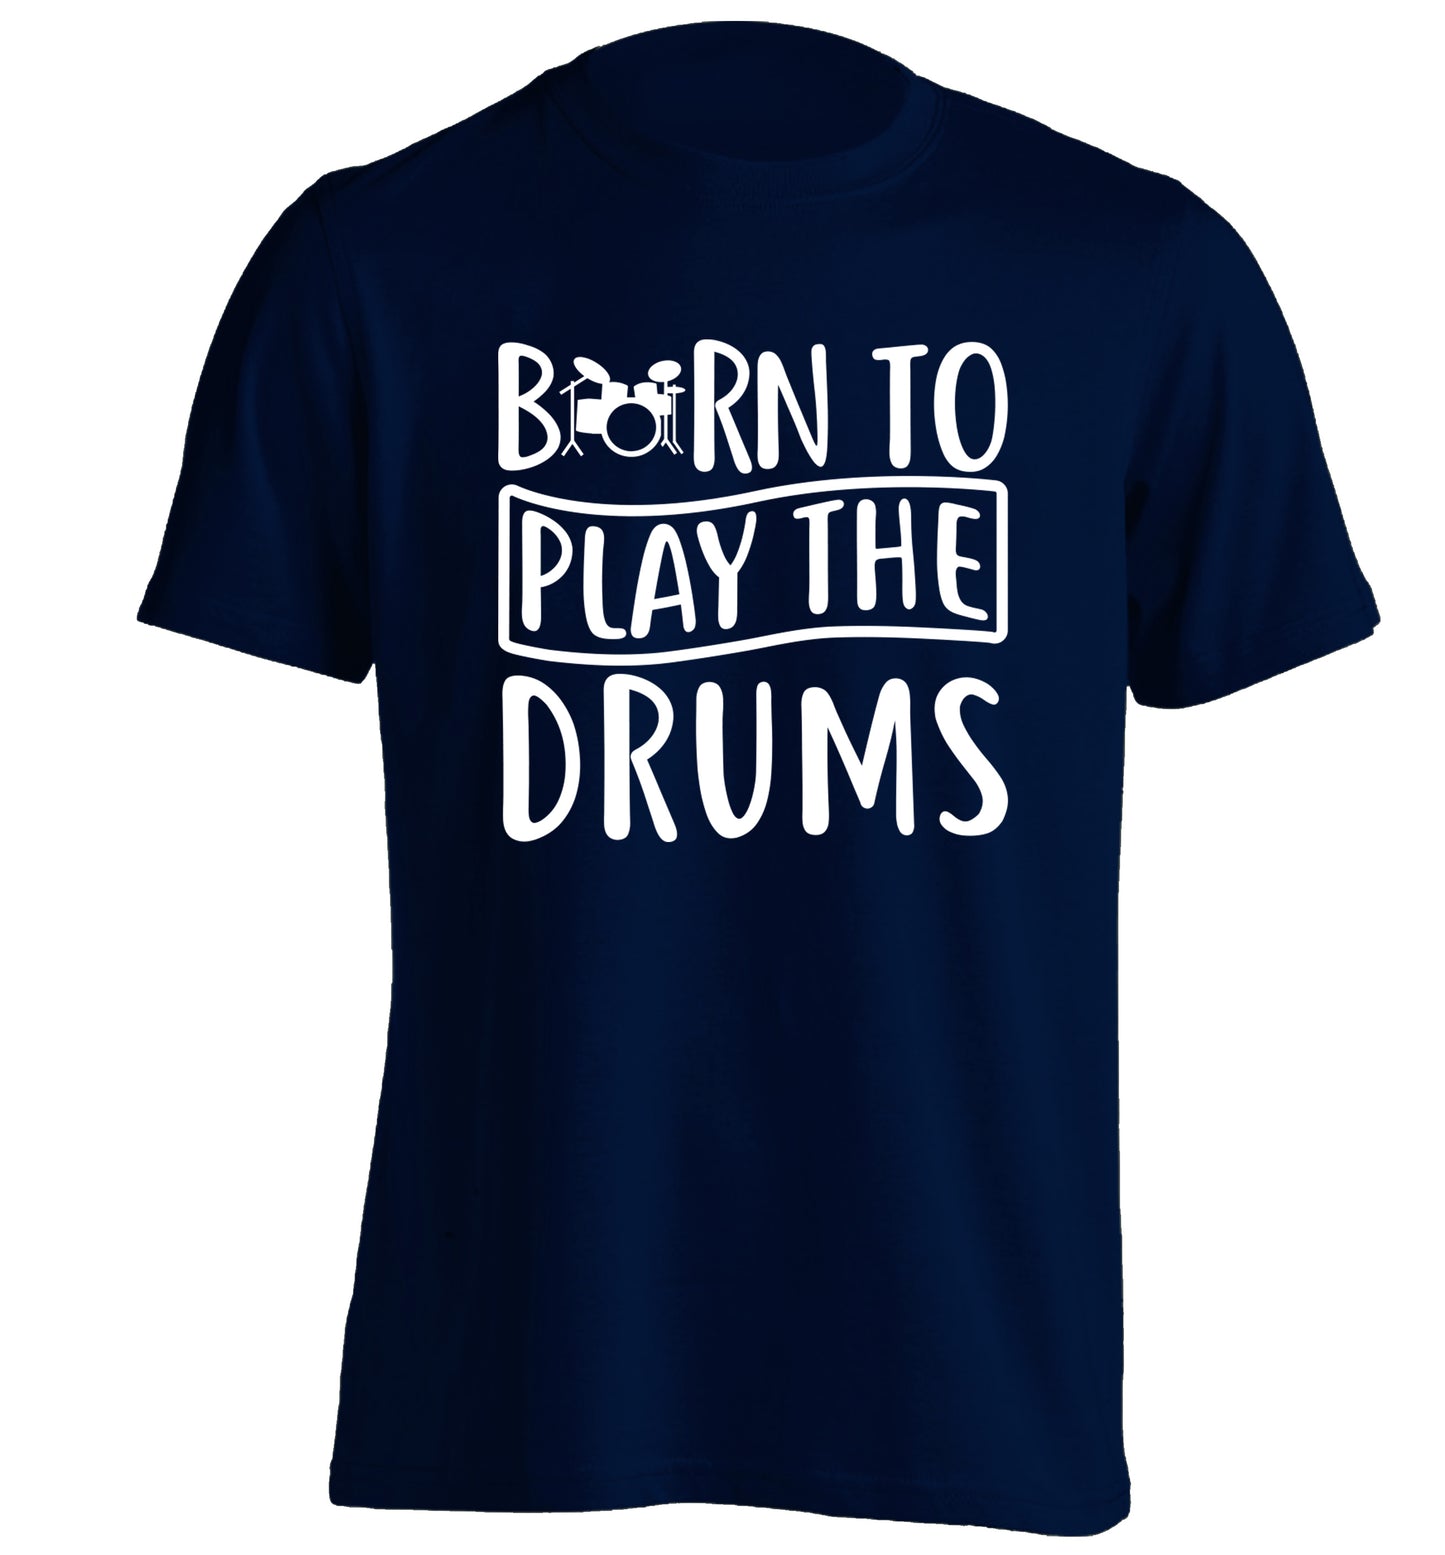 Born to play the drums adults unisex navy Tshirt 2XL